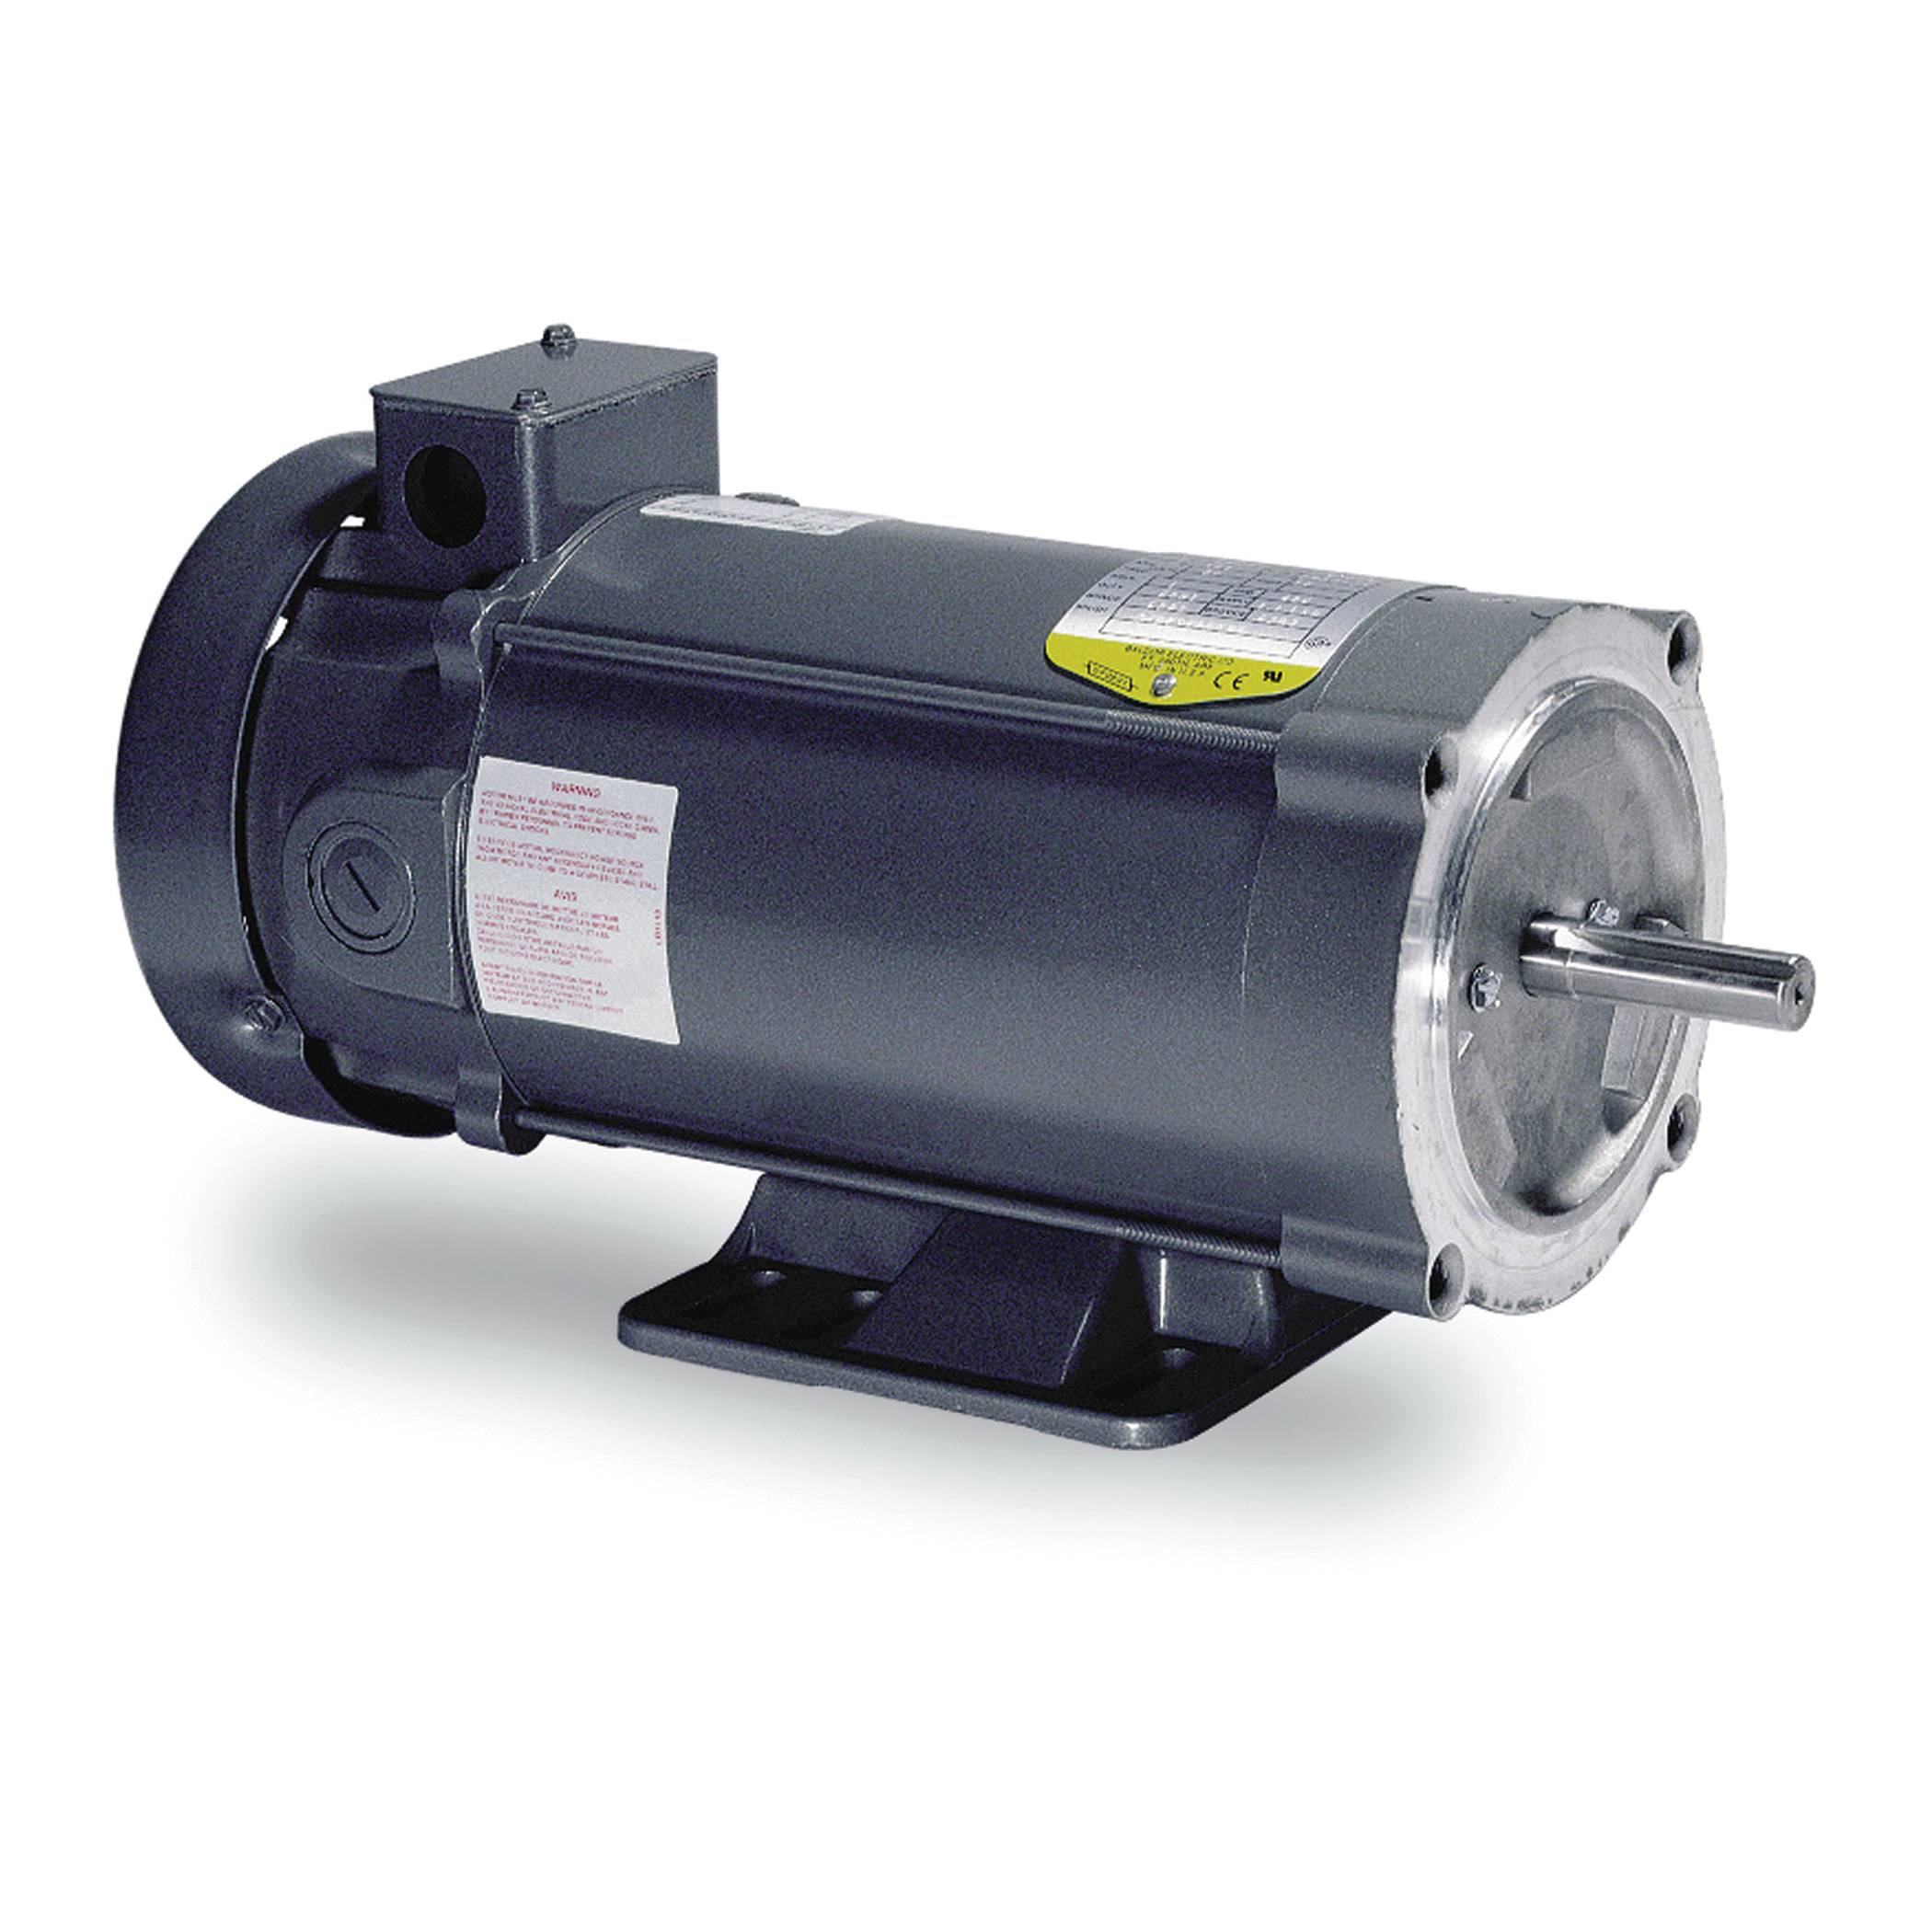 Baldor-Reliance CDP3316 C-Face Continuous Duty Fractional DC Motor With Base, 2.02 ft-lb Torque, 0.33 hp Power Rating, 180 VDC, 1.6 A, 56C Frame, 1750 rpm Speed